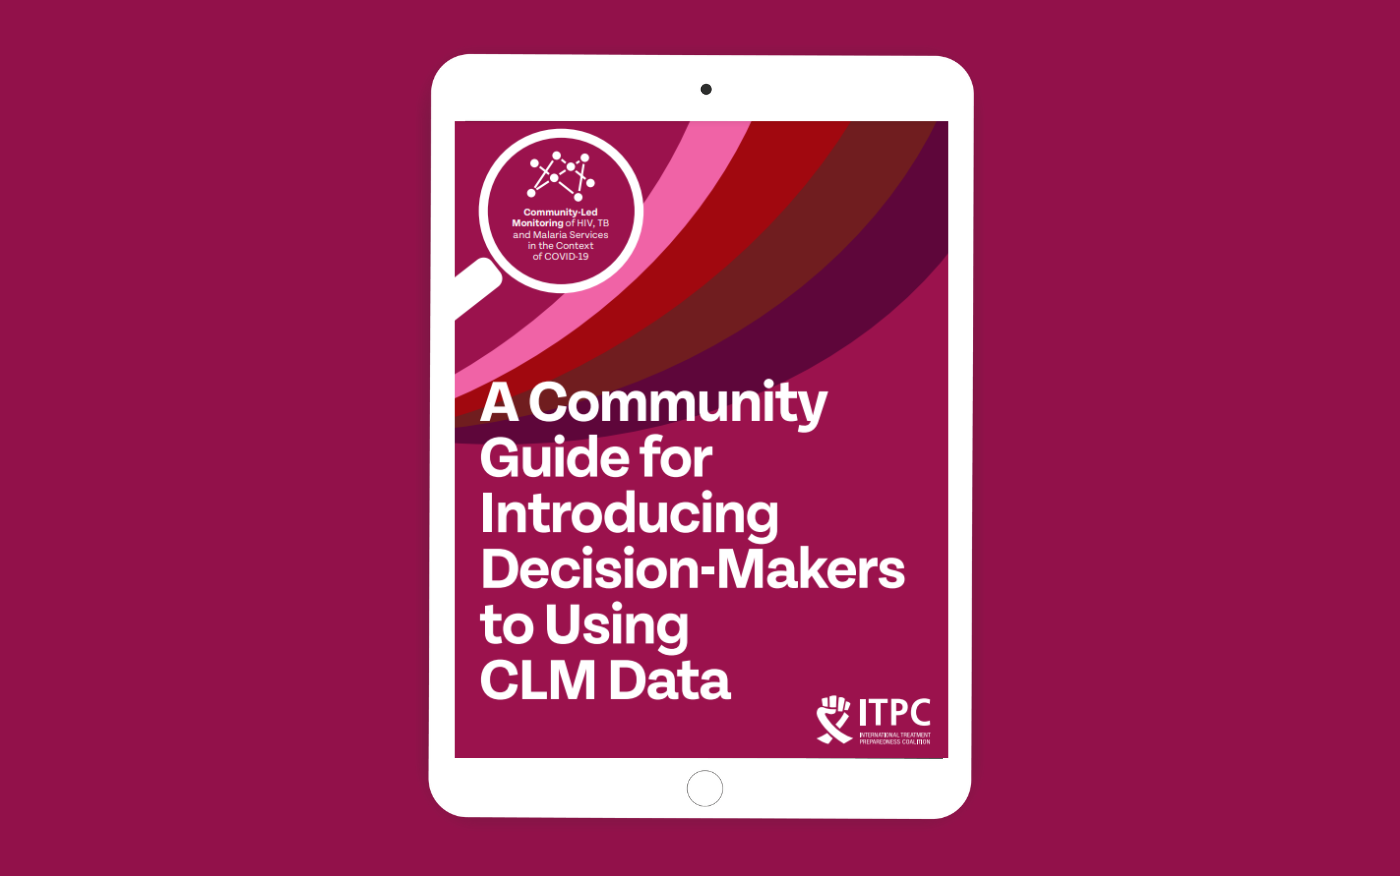 A Community Guide for Introducing Decision-Makers to Using CLM Data